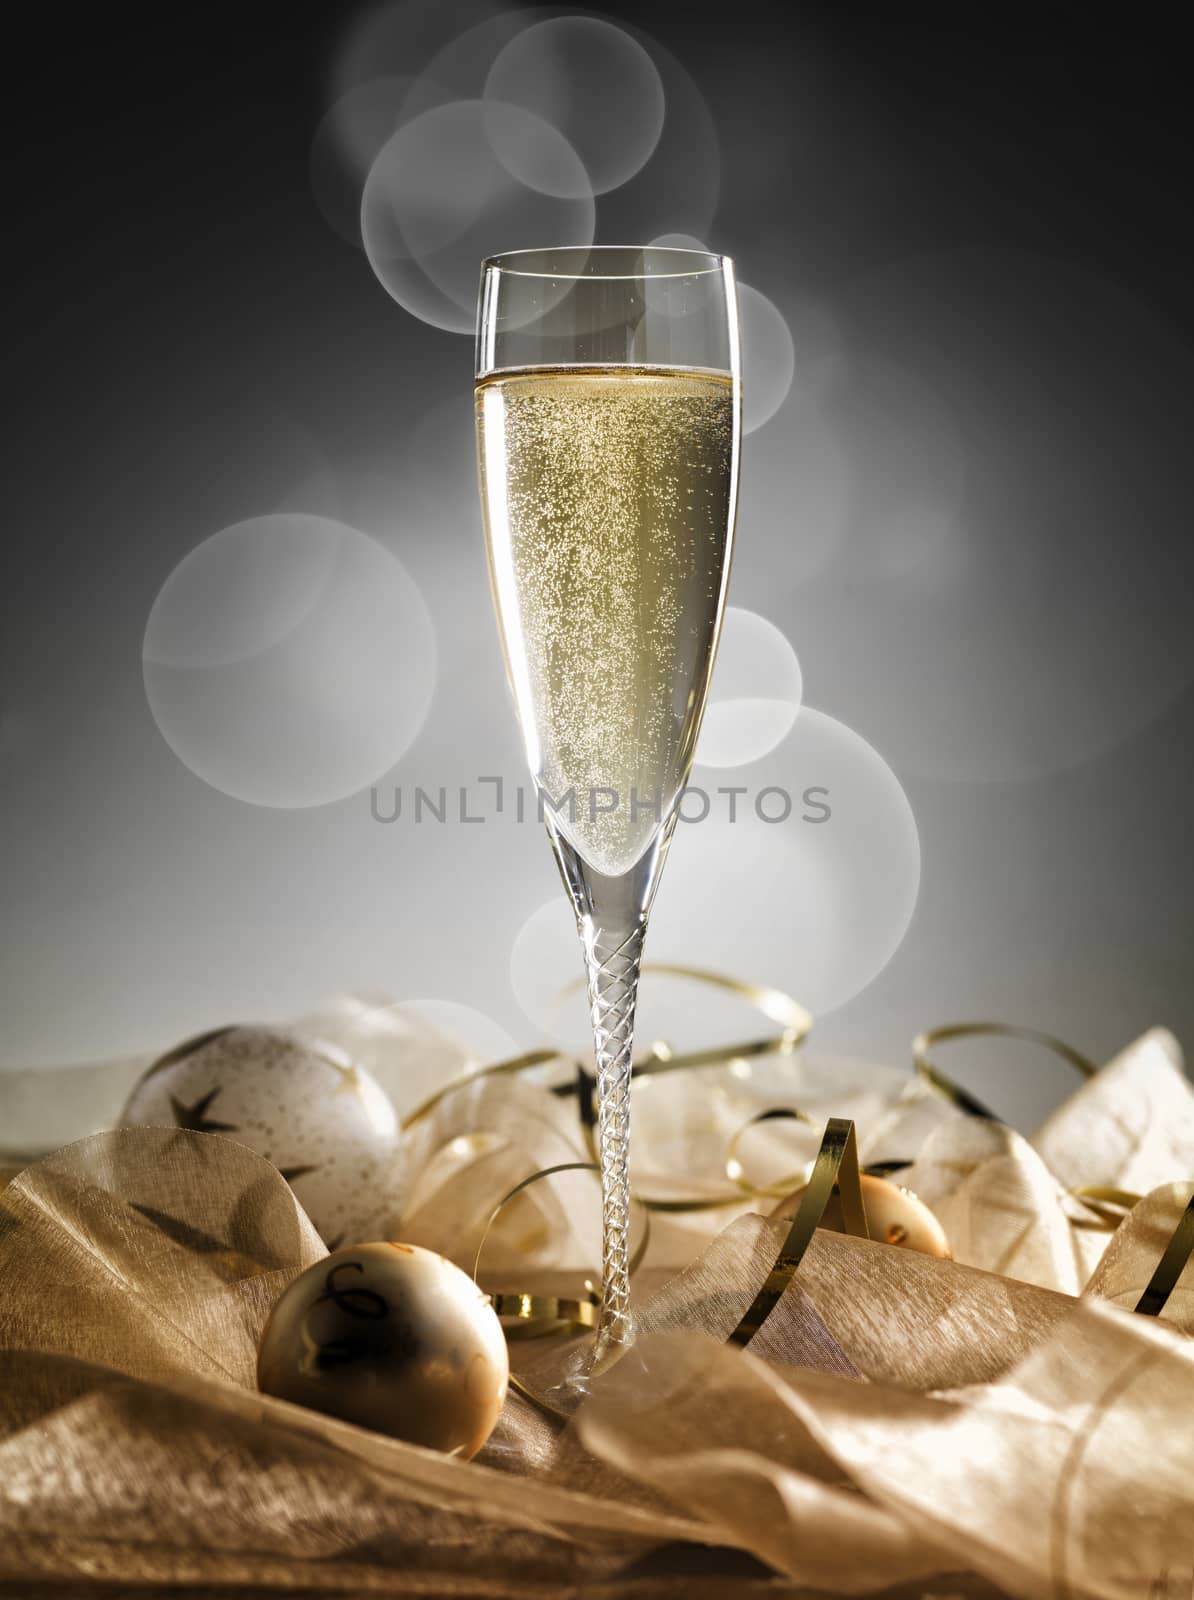 One champagne glass and decoration on golden and silver background by janssenkruseproductions